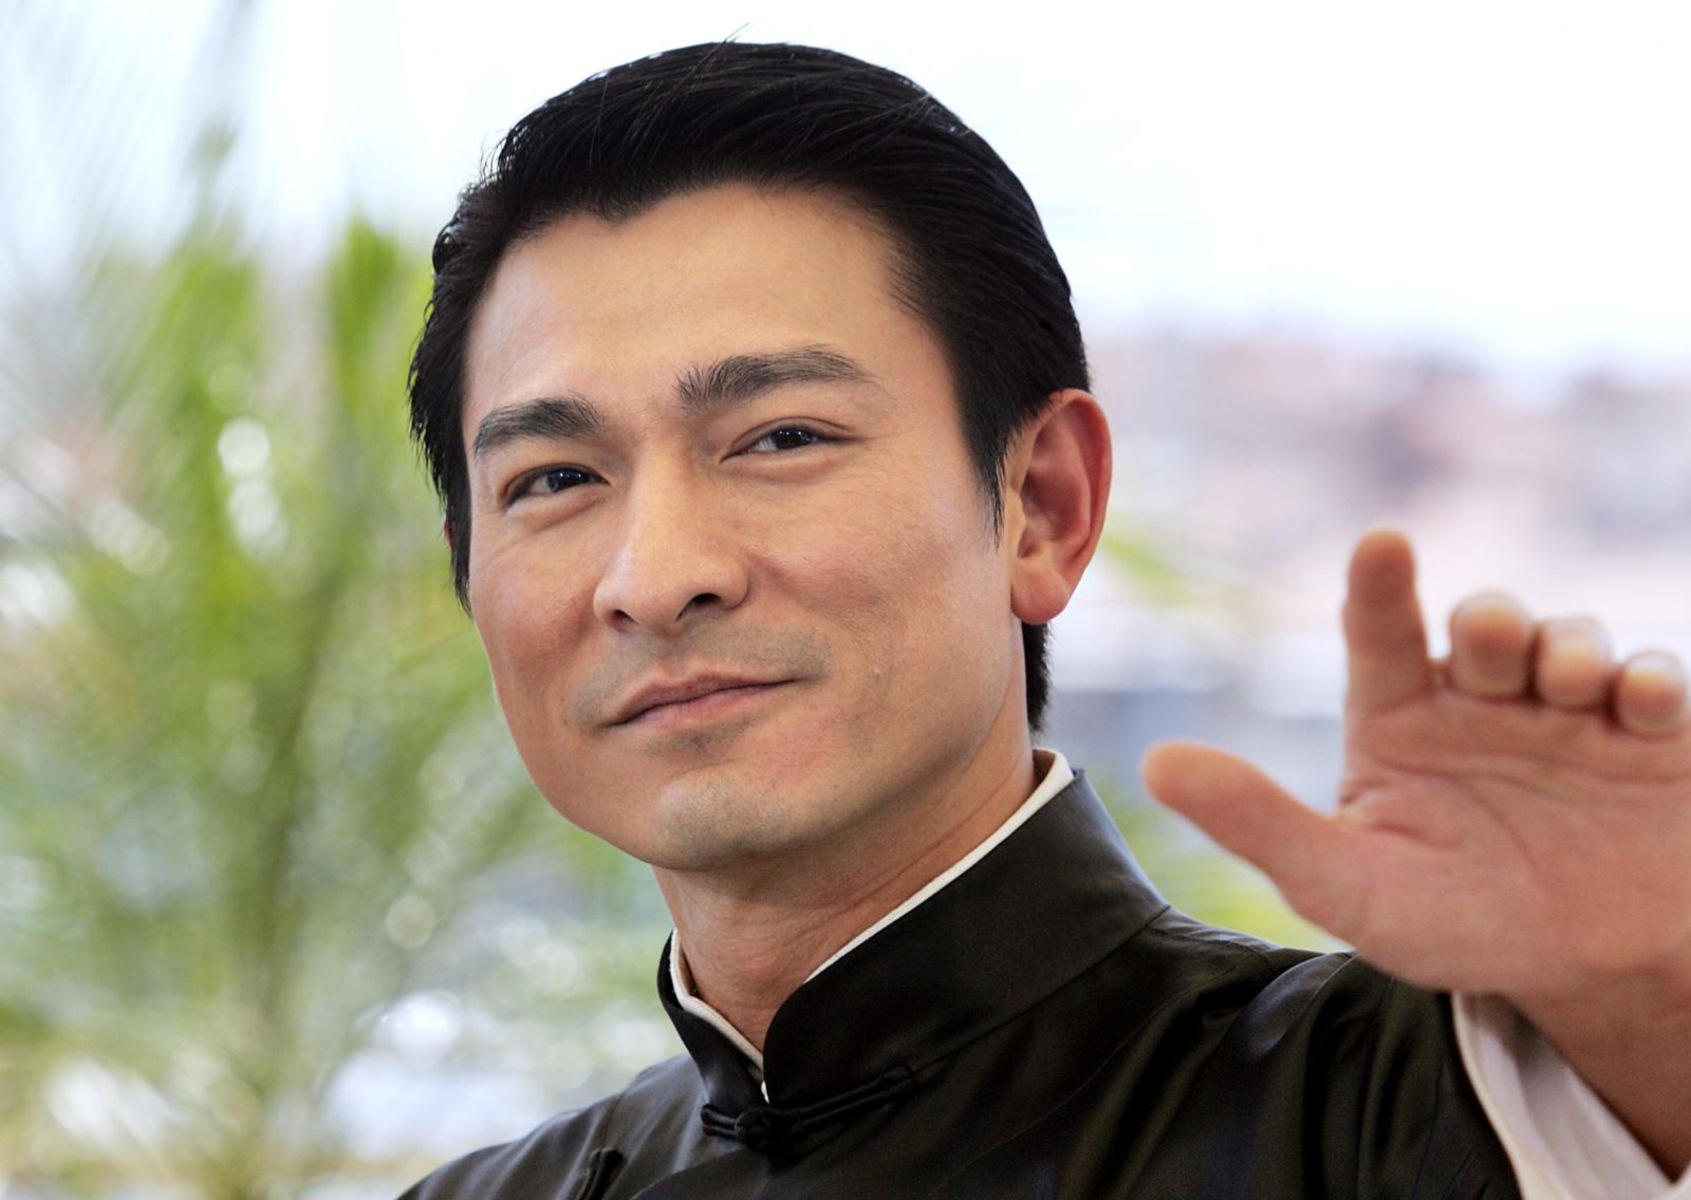 8 Surprising Facts About Andy Lau - Facts.net